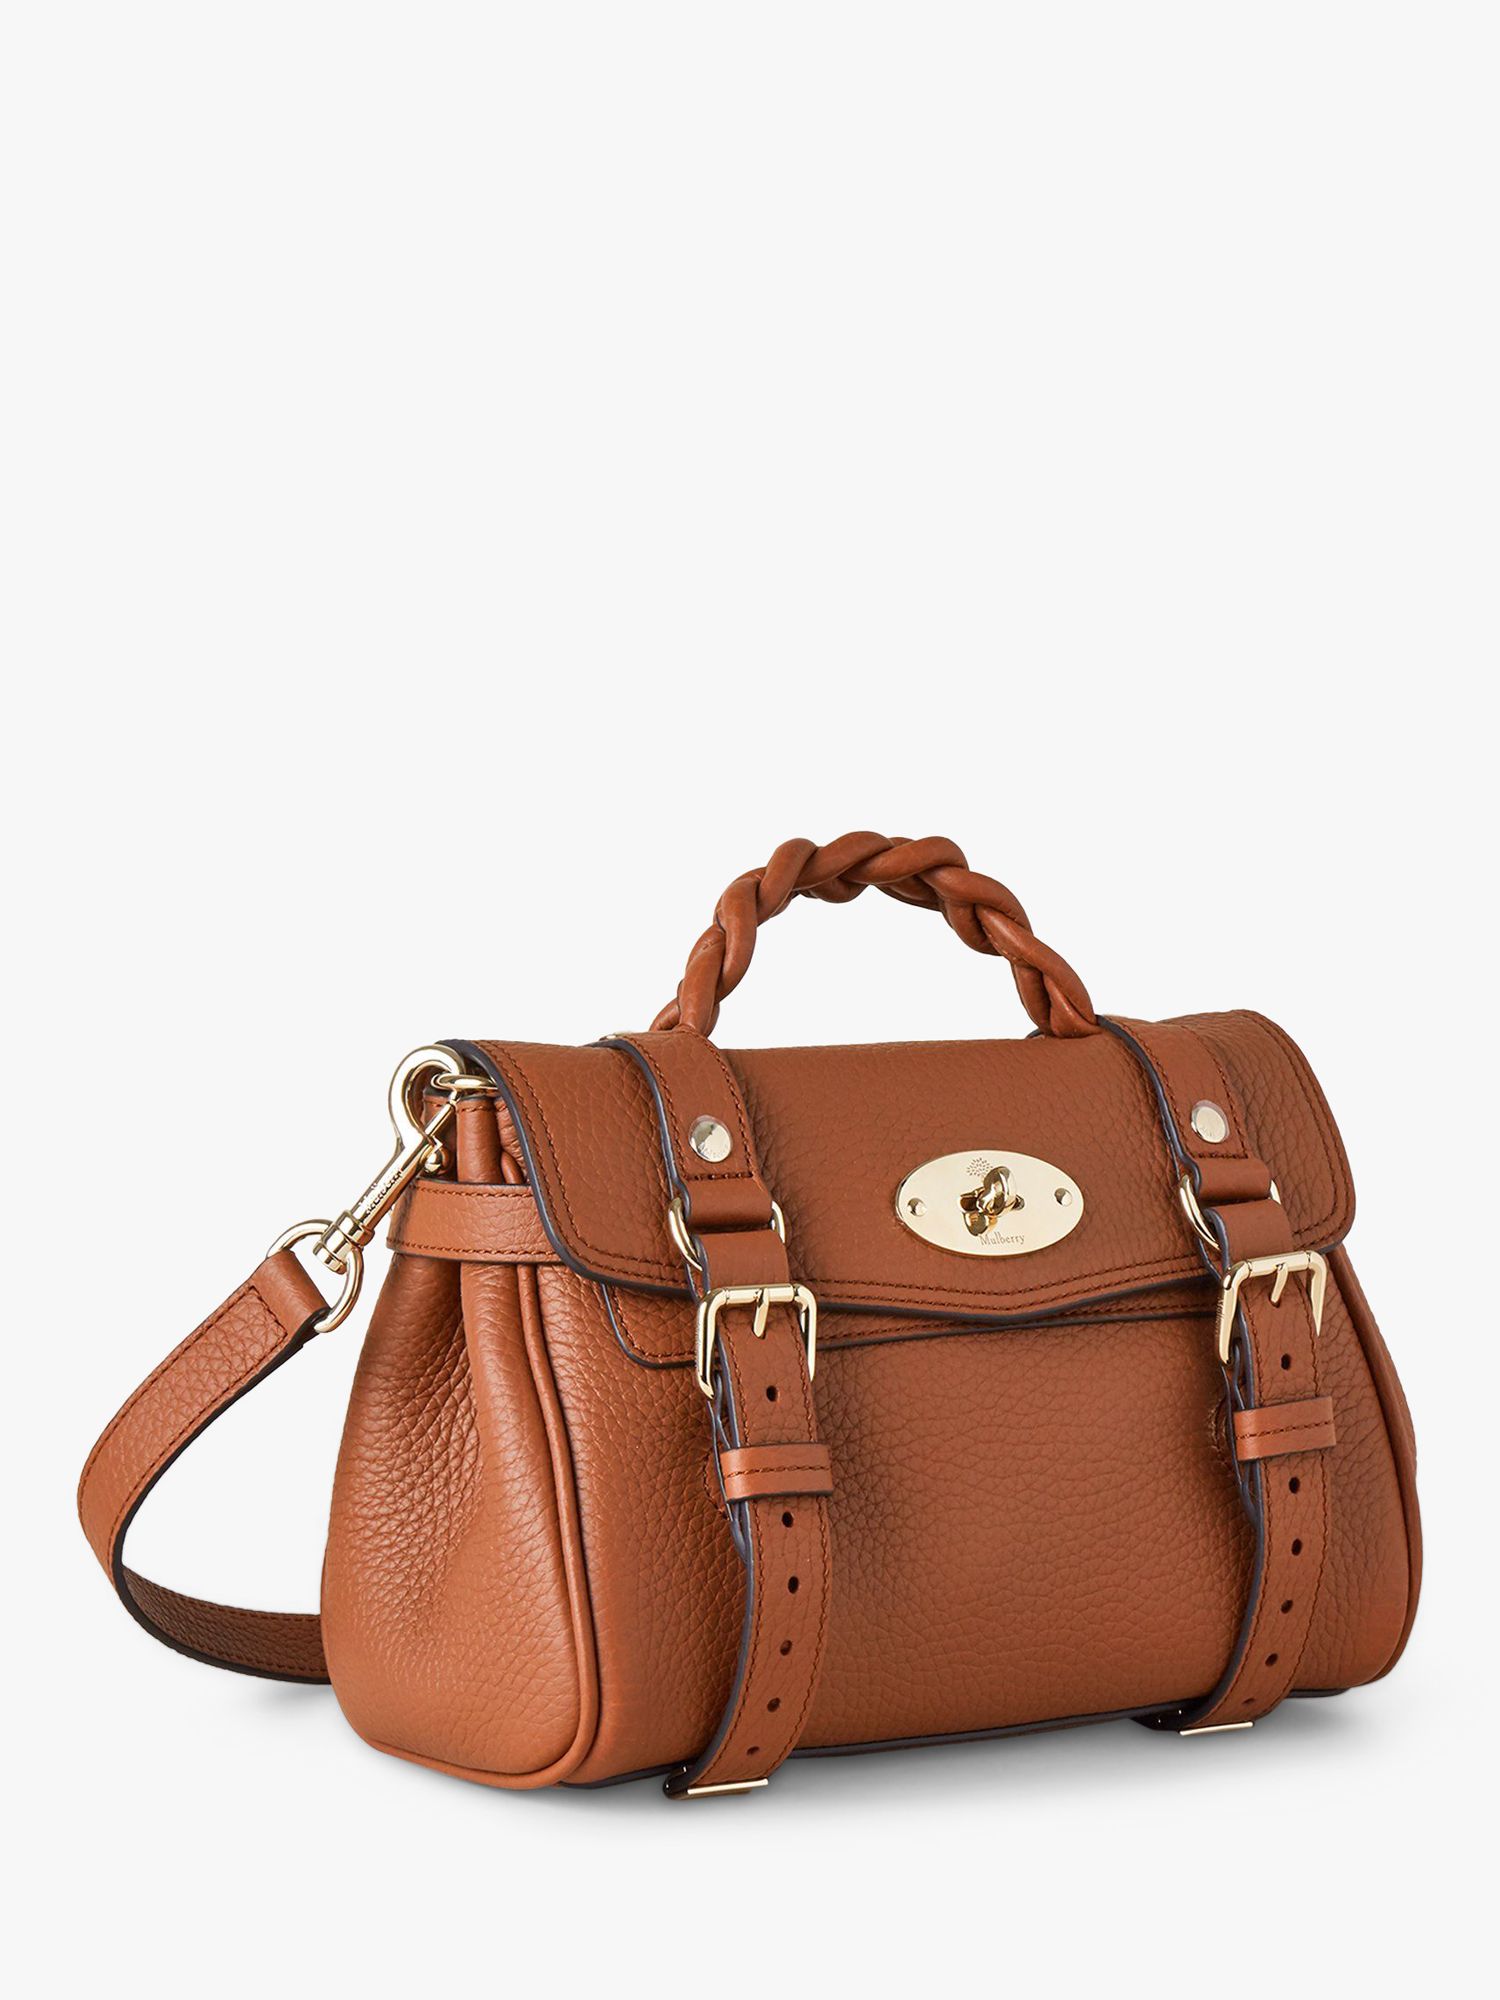 The Mulberry Alexa Oversized Bag : Review, Re-launch and ALL